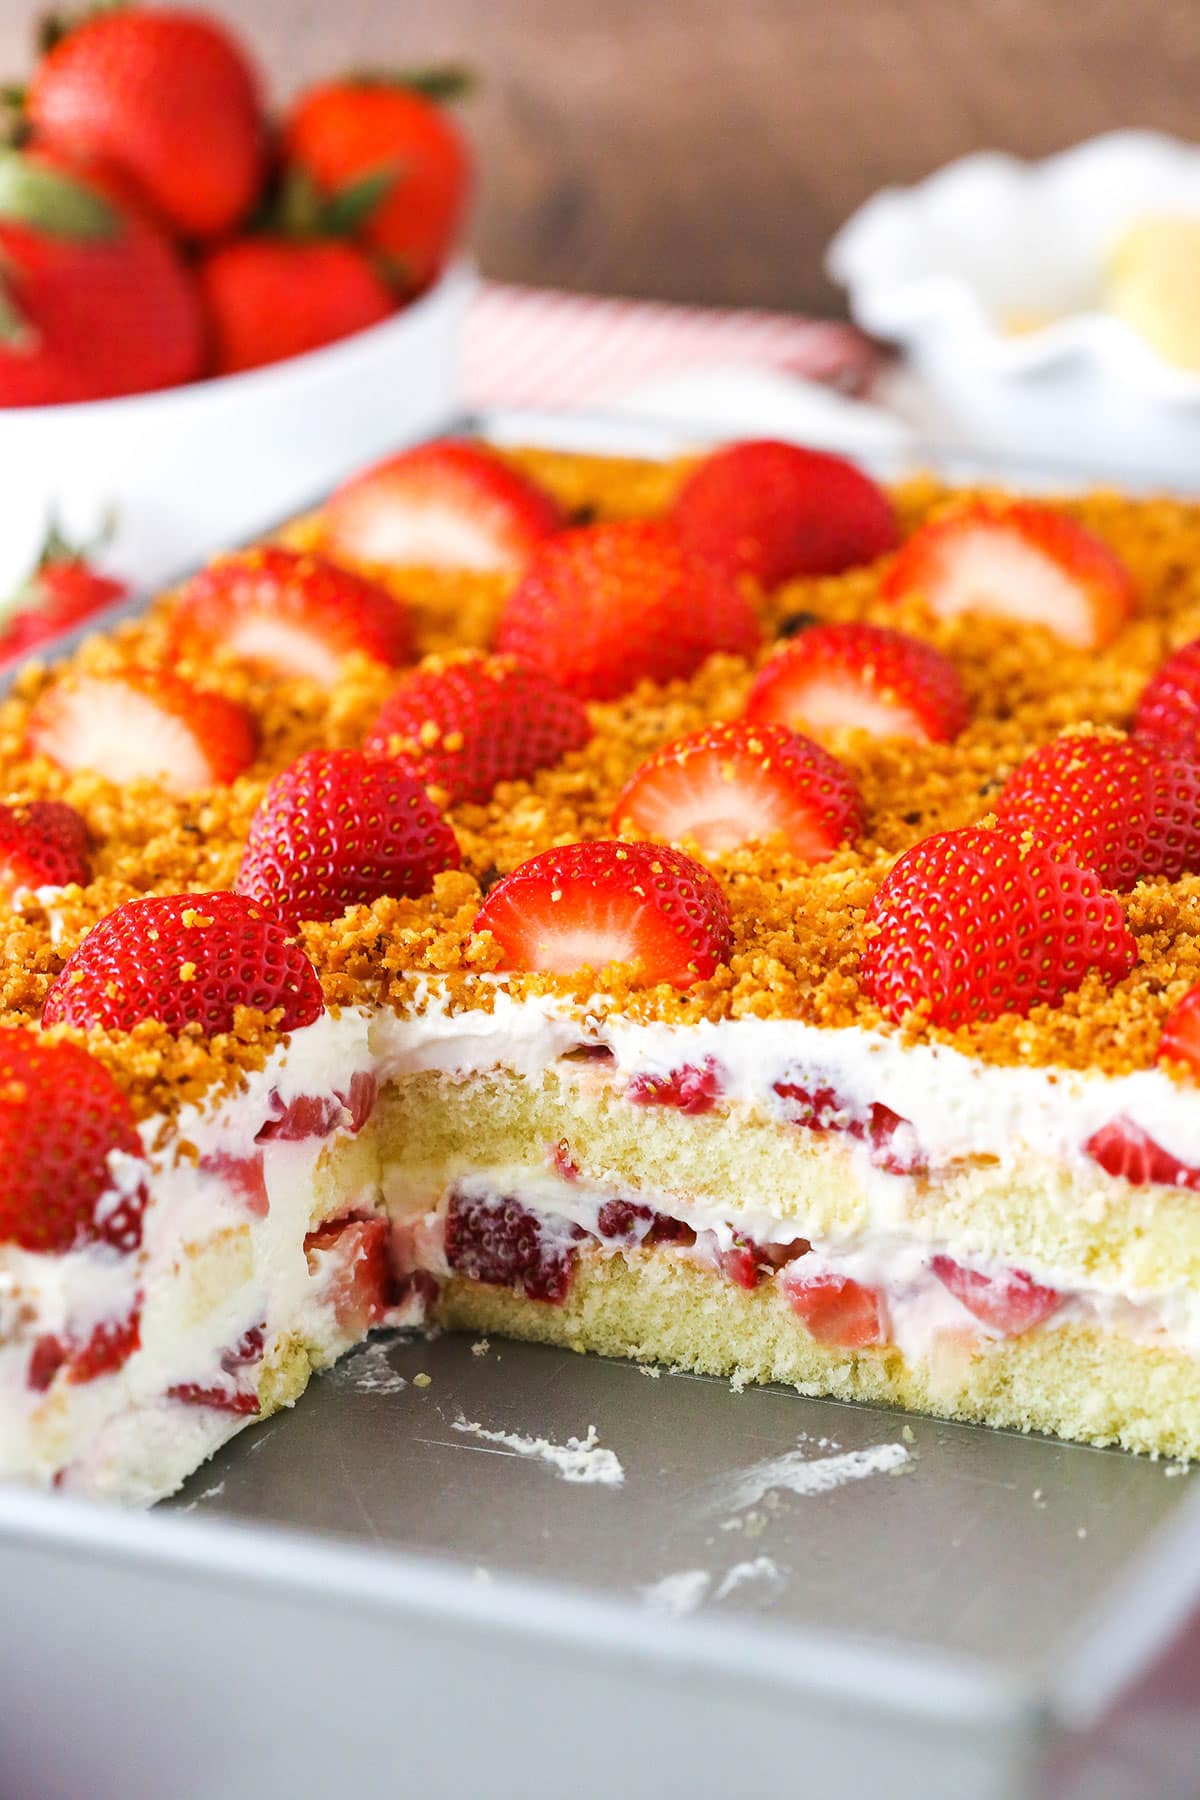 Strawberry icebox cake made with soft ladyfinger cookies.